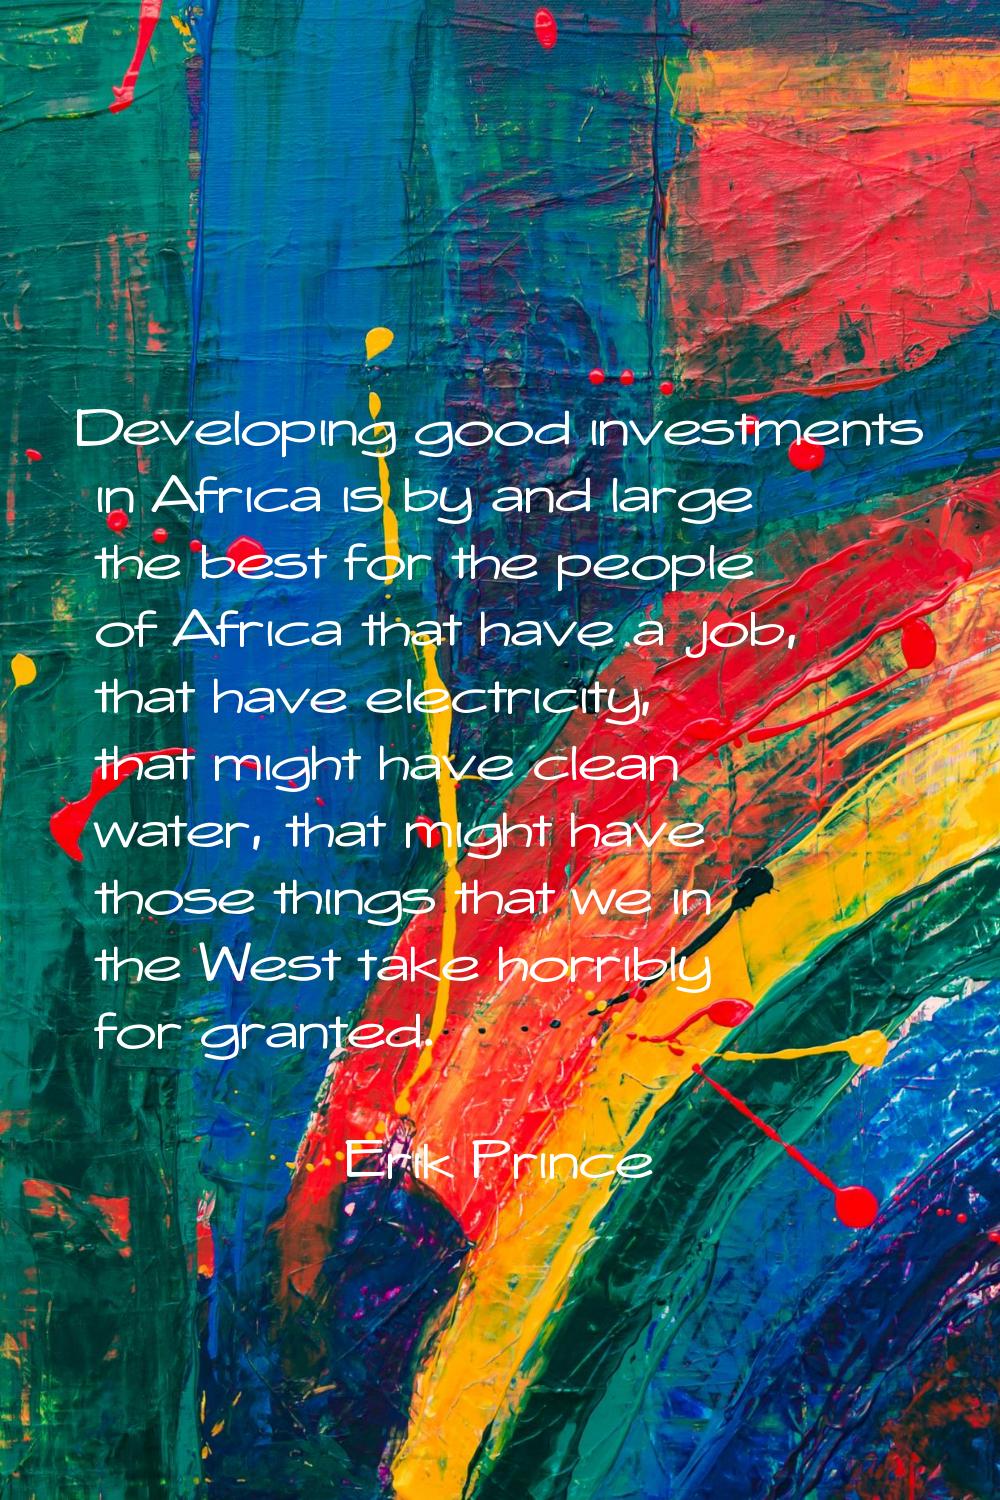 Developing good investments in Africa is by and large the best for the people of Africa that have a